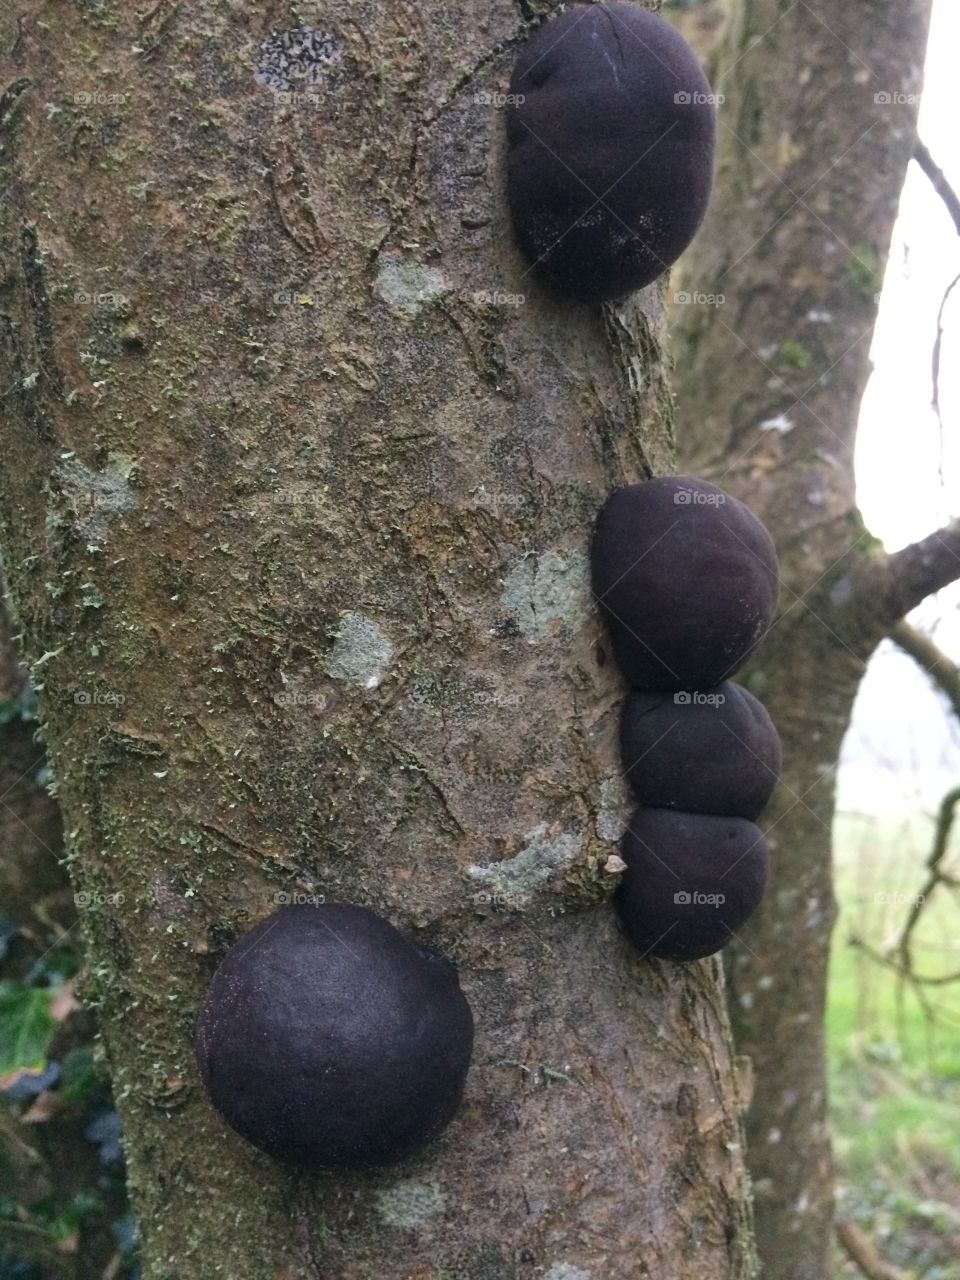 Tree infested with globular fungal growths